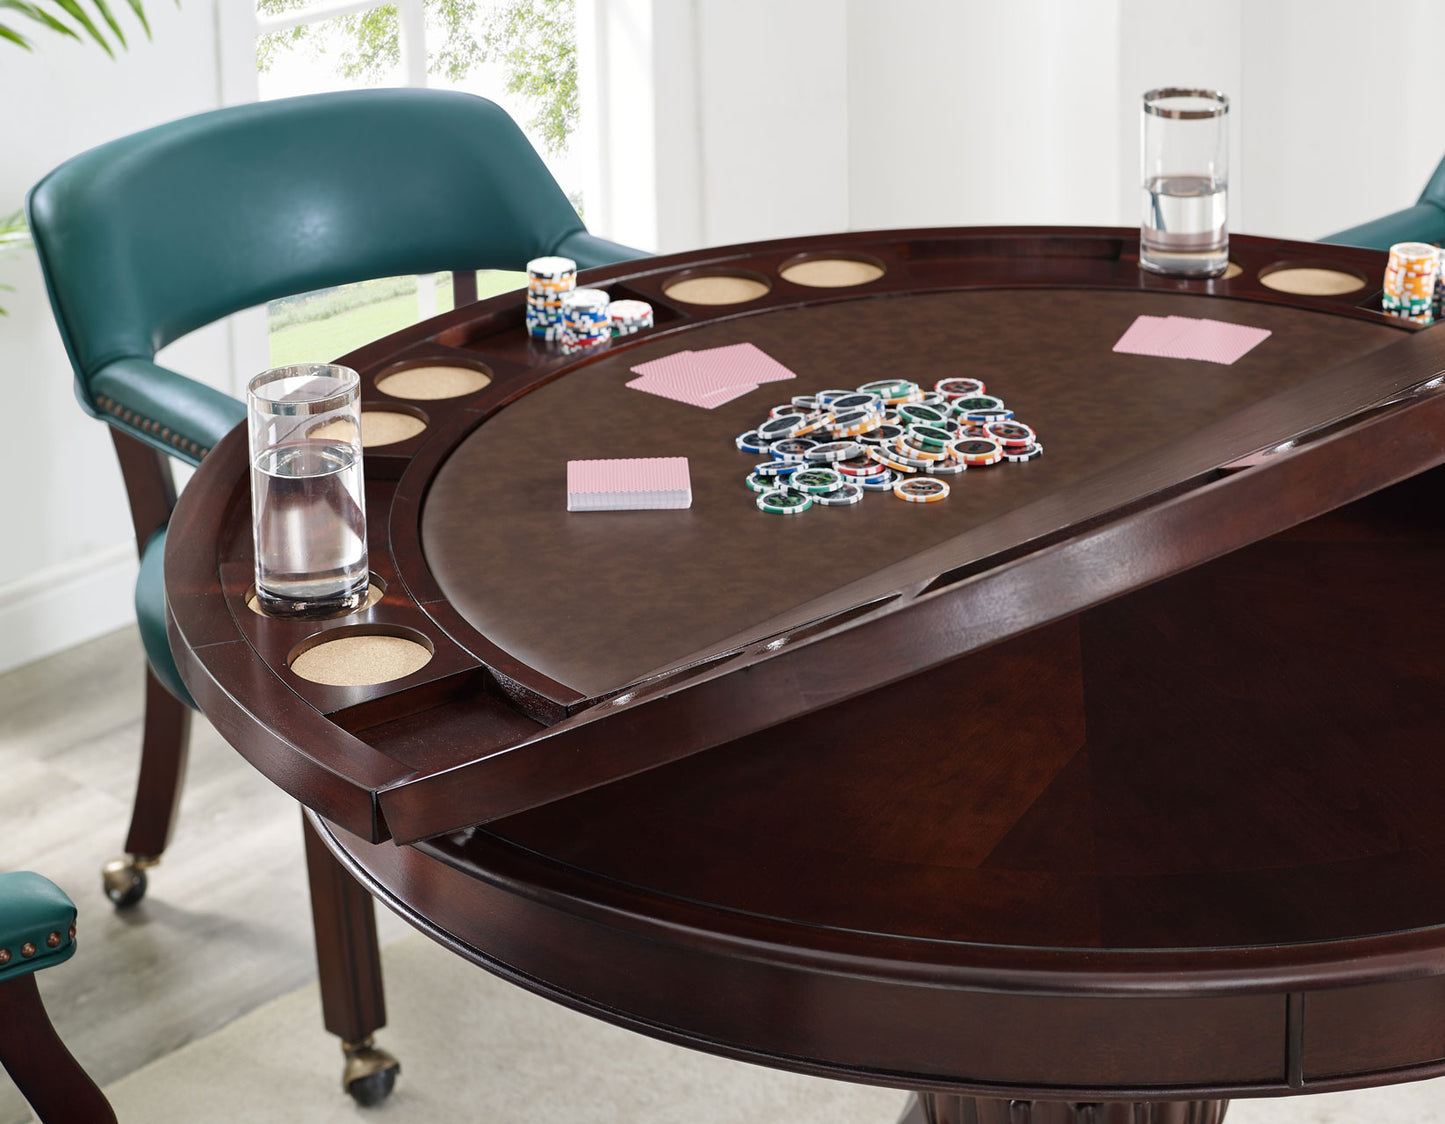 Tournament Game Table and Chairs, 6 Piece, Teal
(Table & 4 Captains Chairs)